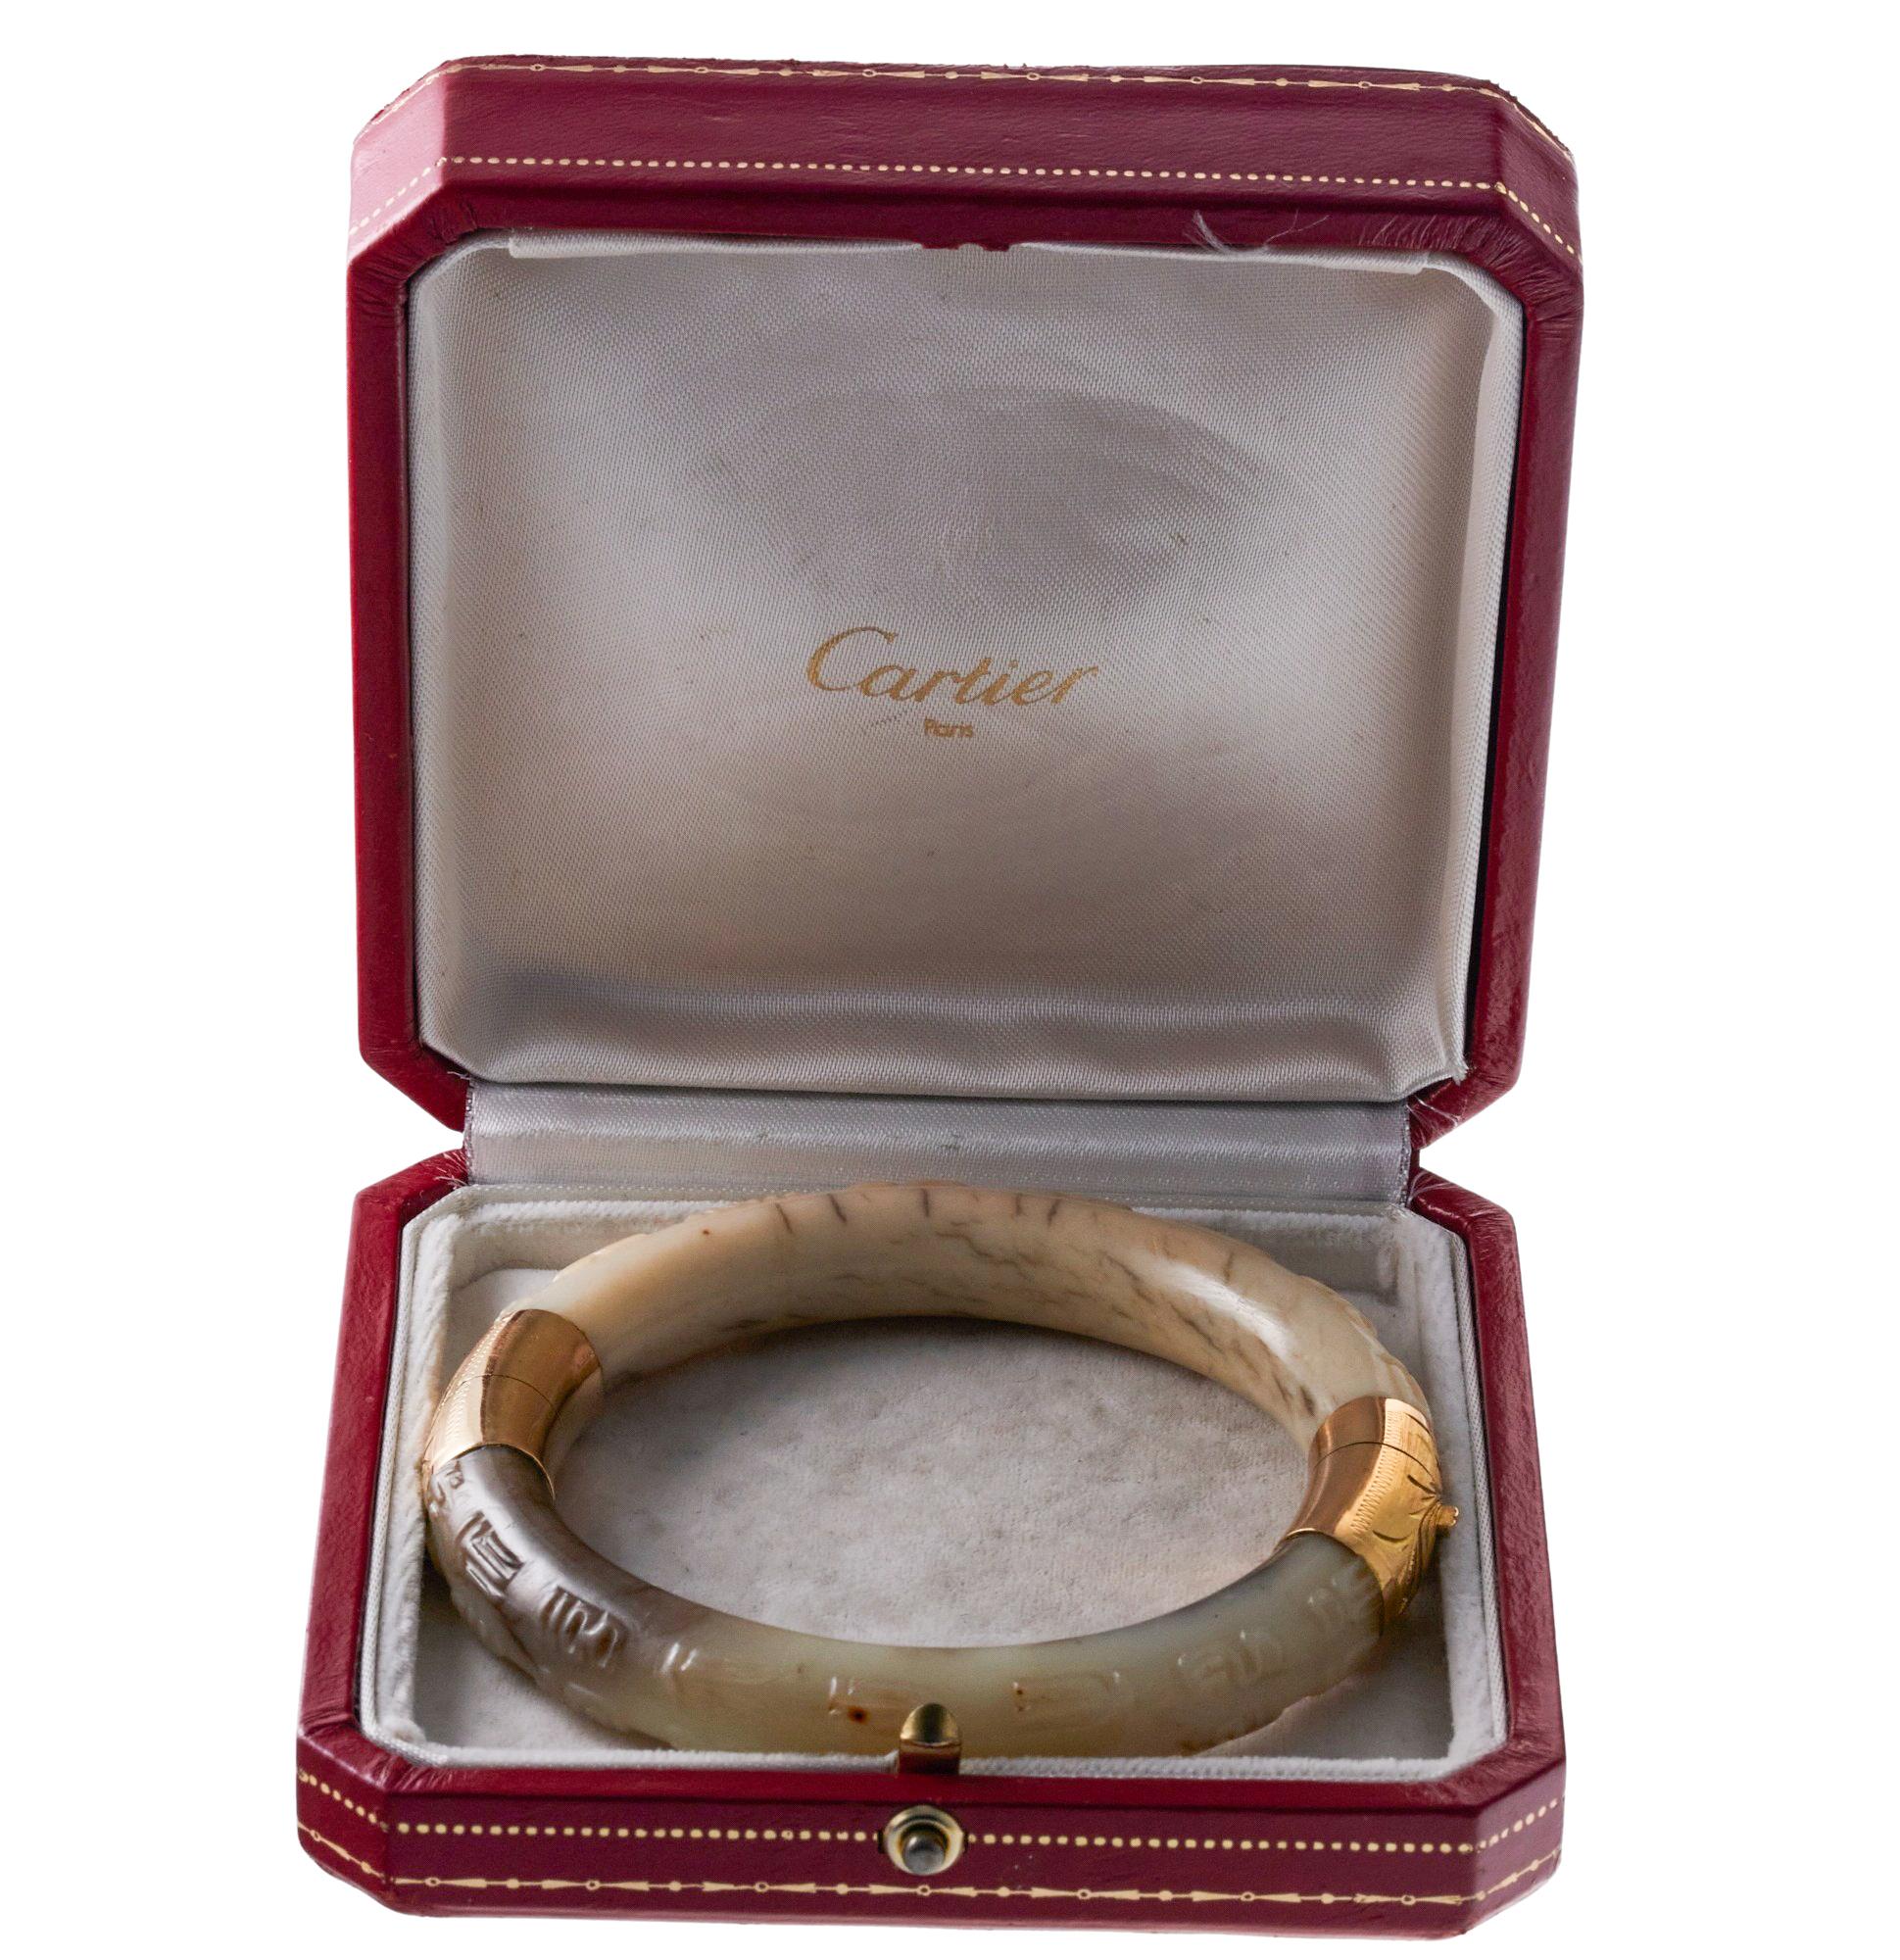 Antique Cartier 18k gold bangle bracelet, featuring carved jade. Comes in original antique box - wear consistent with age.  Bracelet will fit approx. 7